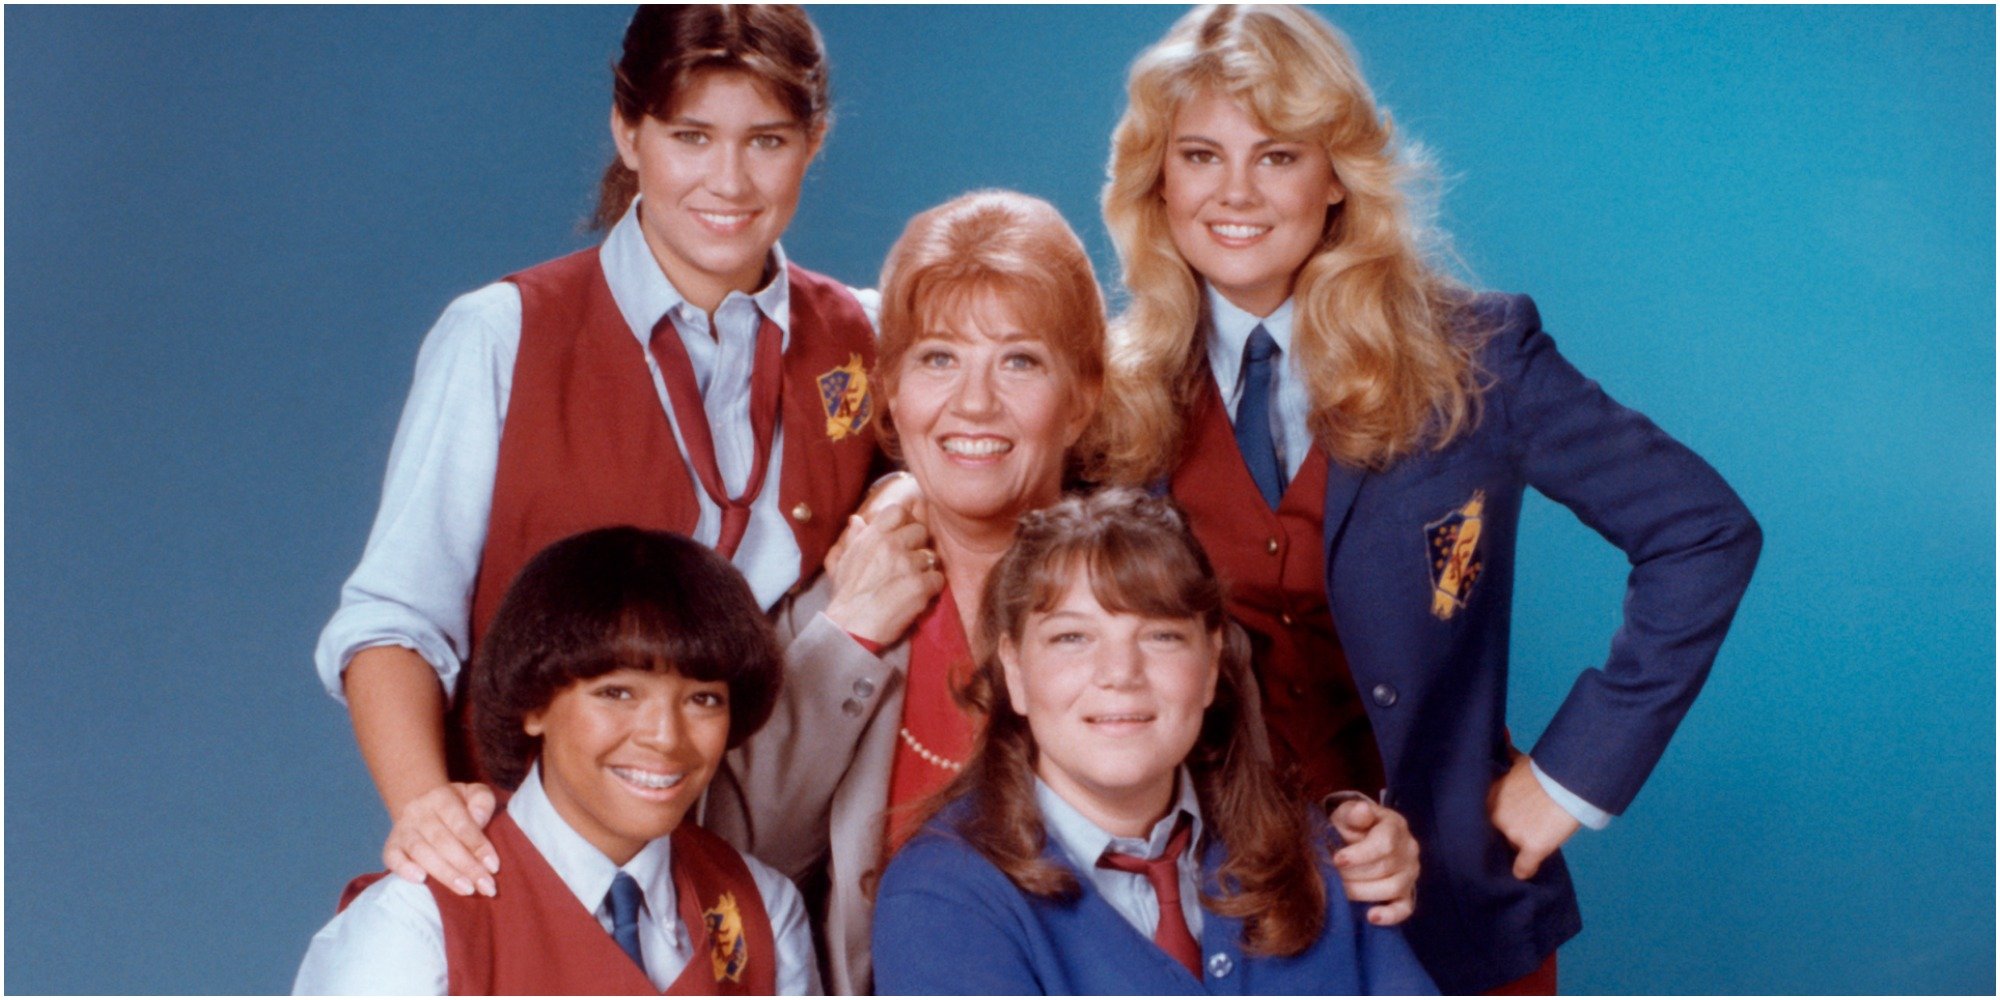 The cast of the NBC television series The Facts of Life.